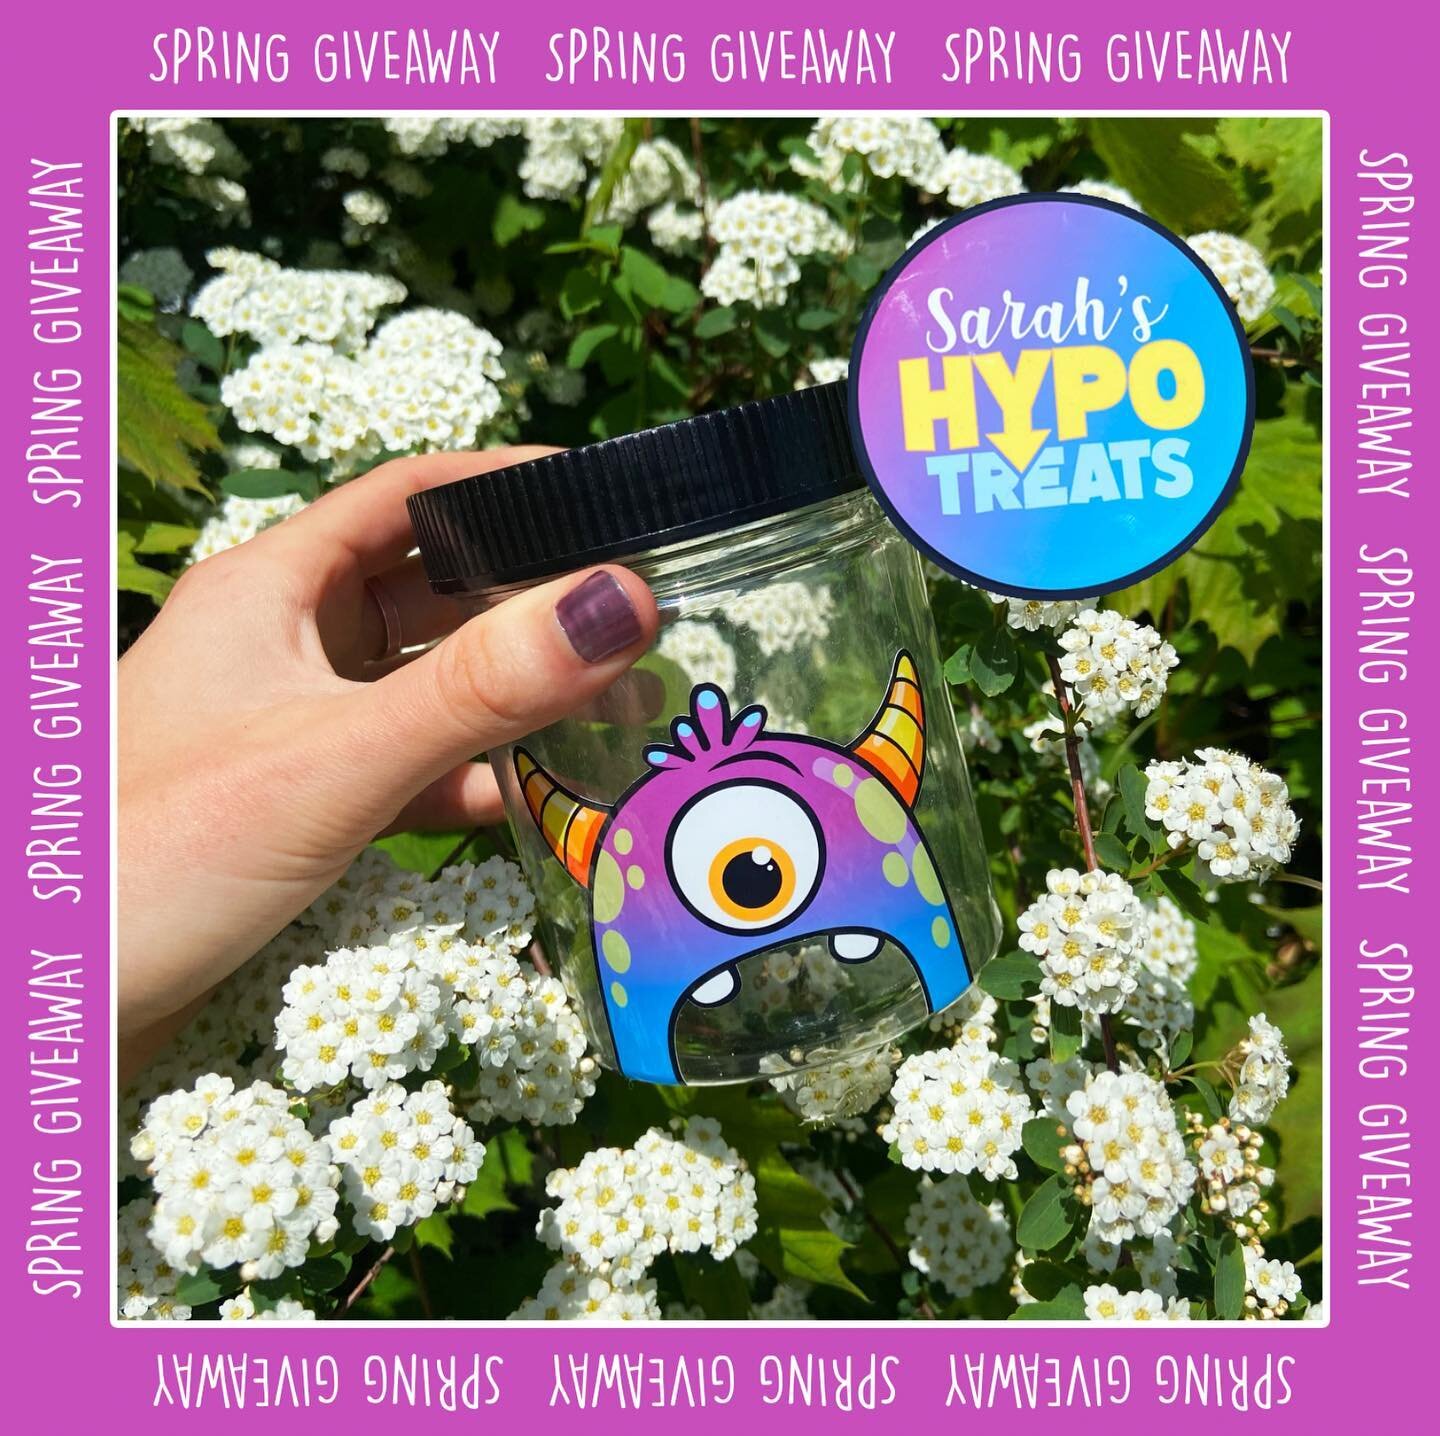 Spring Giveaway! Enter to win a personalized Hypo-Treat jar! Winner will be announced on Friday, May 27th. Here&rsquo;s how to enter -
- Follow @mytype_1 
- Like this post
- Tag a friend in the comments (one tag = one entry)
- For an extra entry, pos